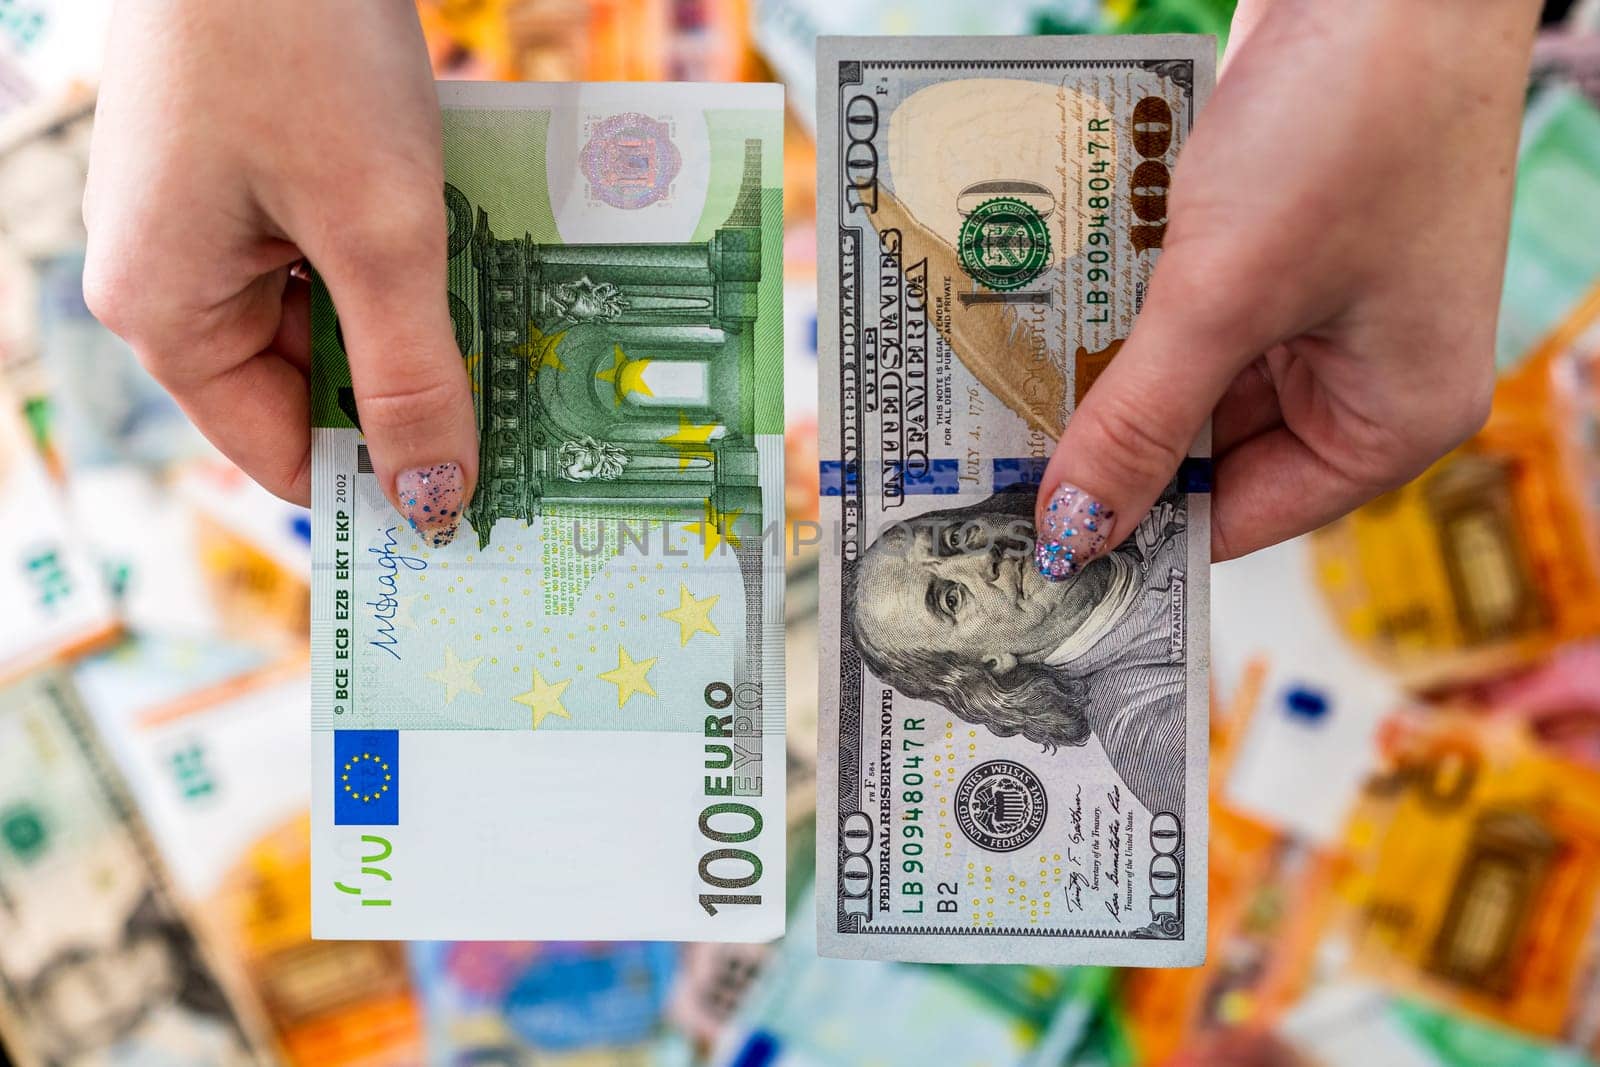 Mix of world currency banknotes: USD, EURO, CHF, LEI